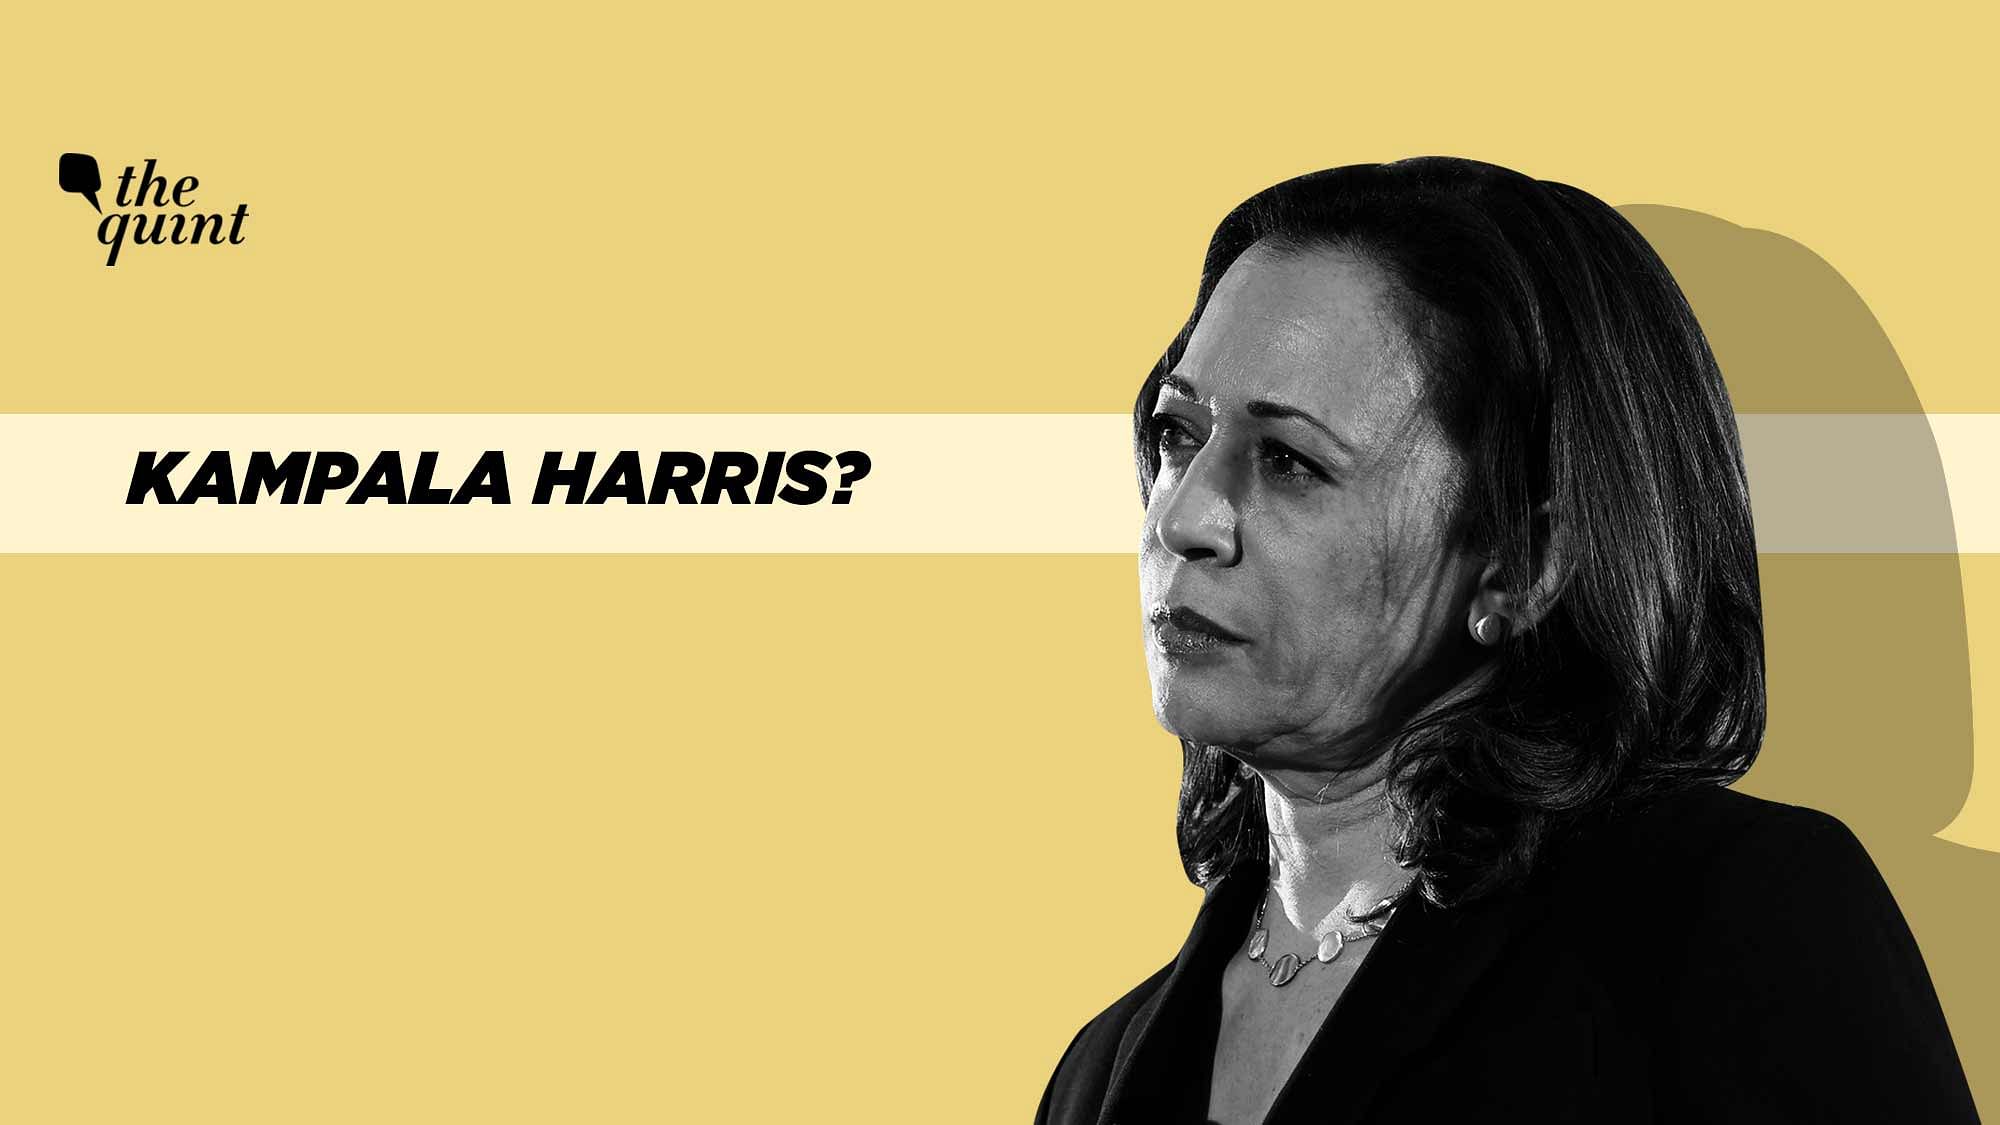 As bi-racial candidate of Indian and Jamaican descent, Kamala Harris was announced to be Joe Biden’s running mate and Vice-President pick, ‘Kampala Harris’ trended on American Twitter.